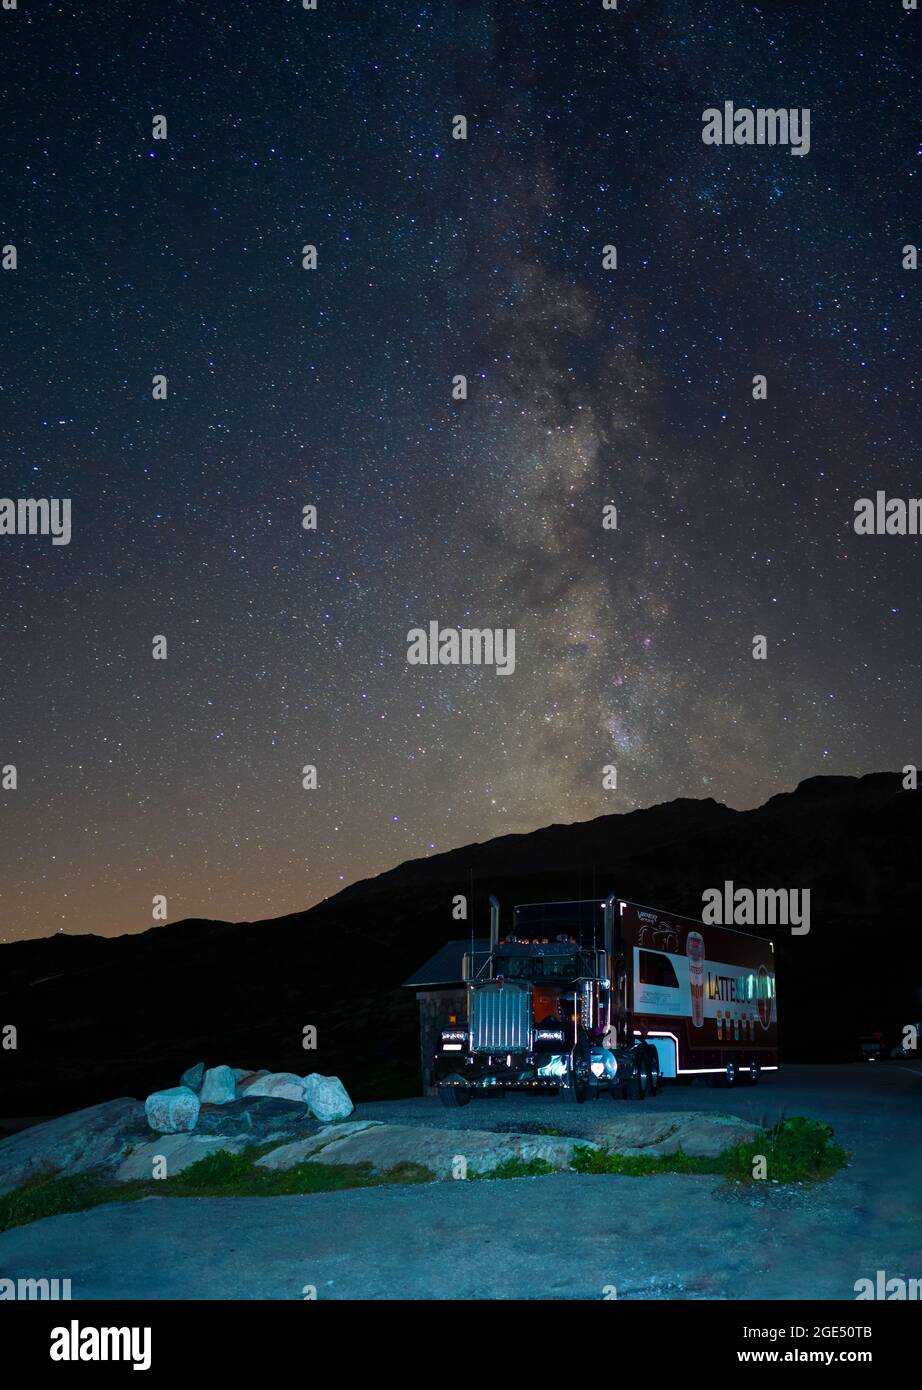 Grimselpass, Switzerland - August 13, 2021: A truck with advertising of  company Latesso on Grimselpass under the Milky way Stock Photo - Alamy